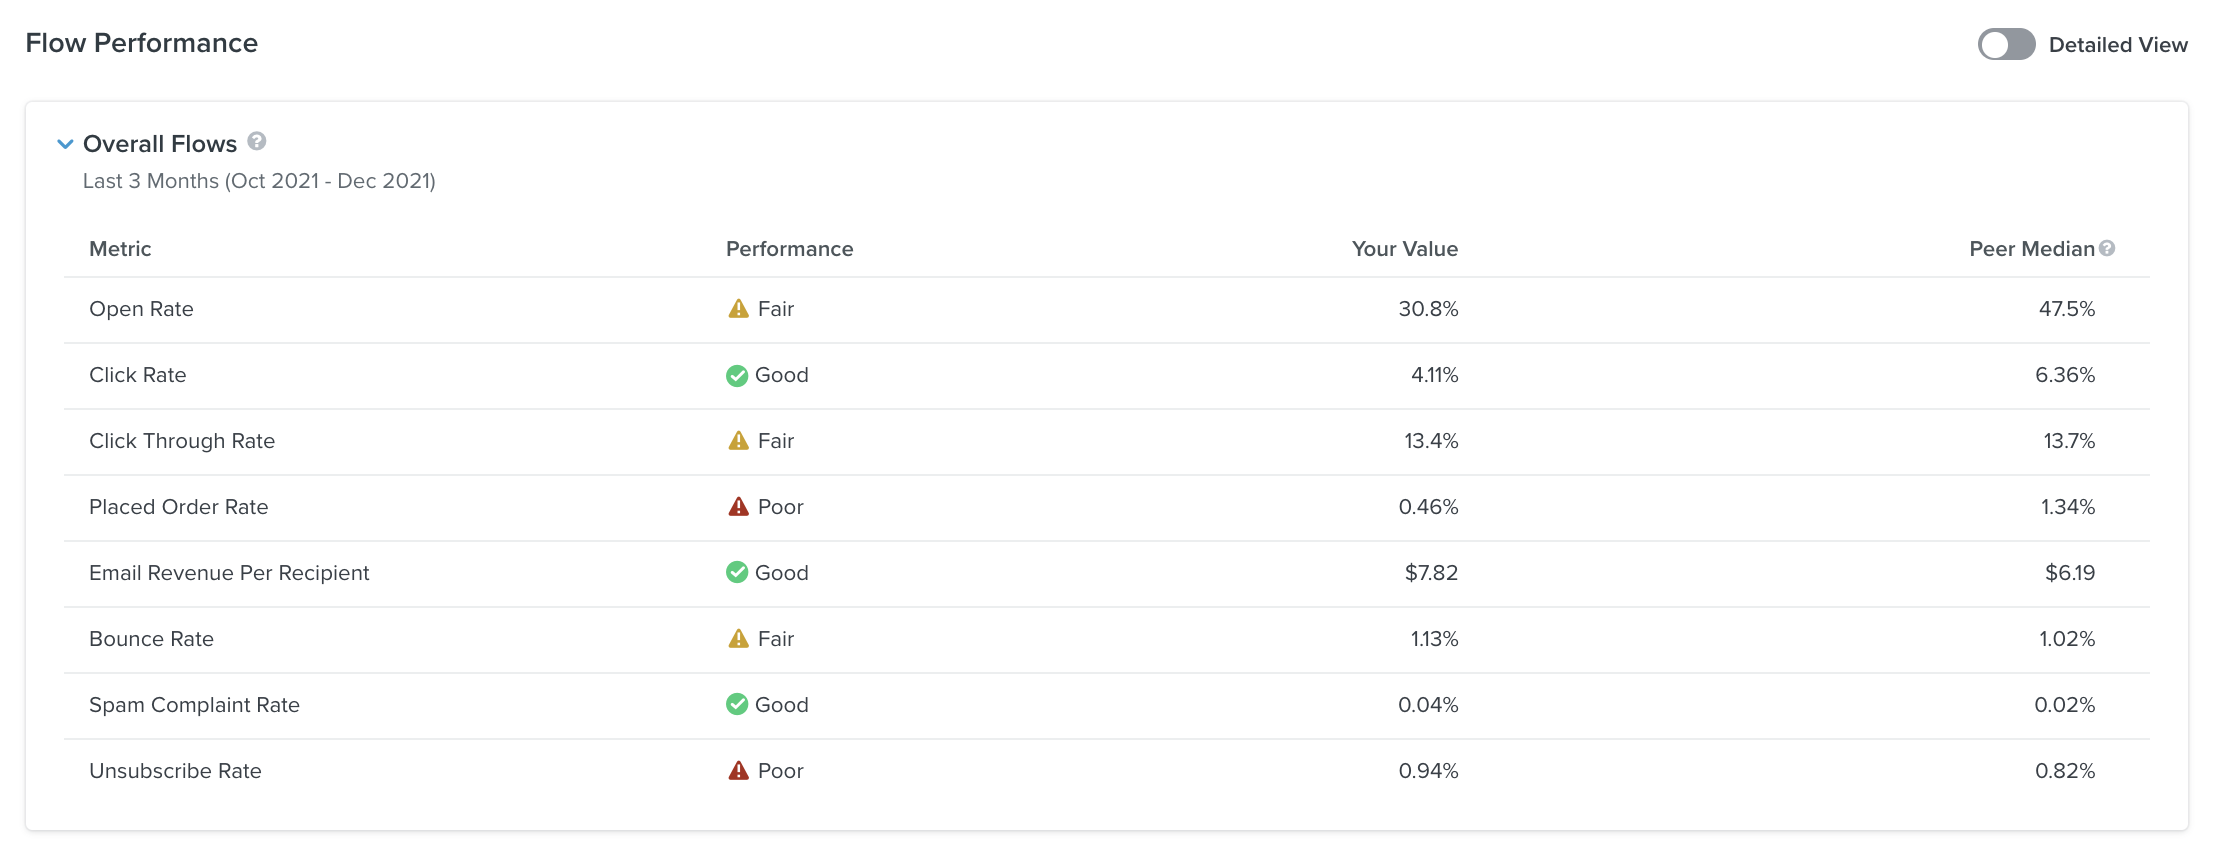 Inside the Flows Performance page showing metrics, benchmark performance, your value, and peer median value in list